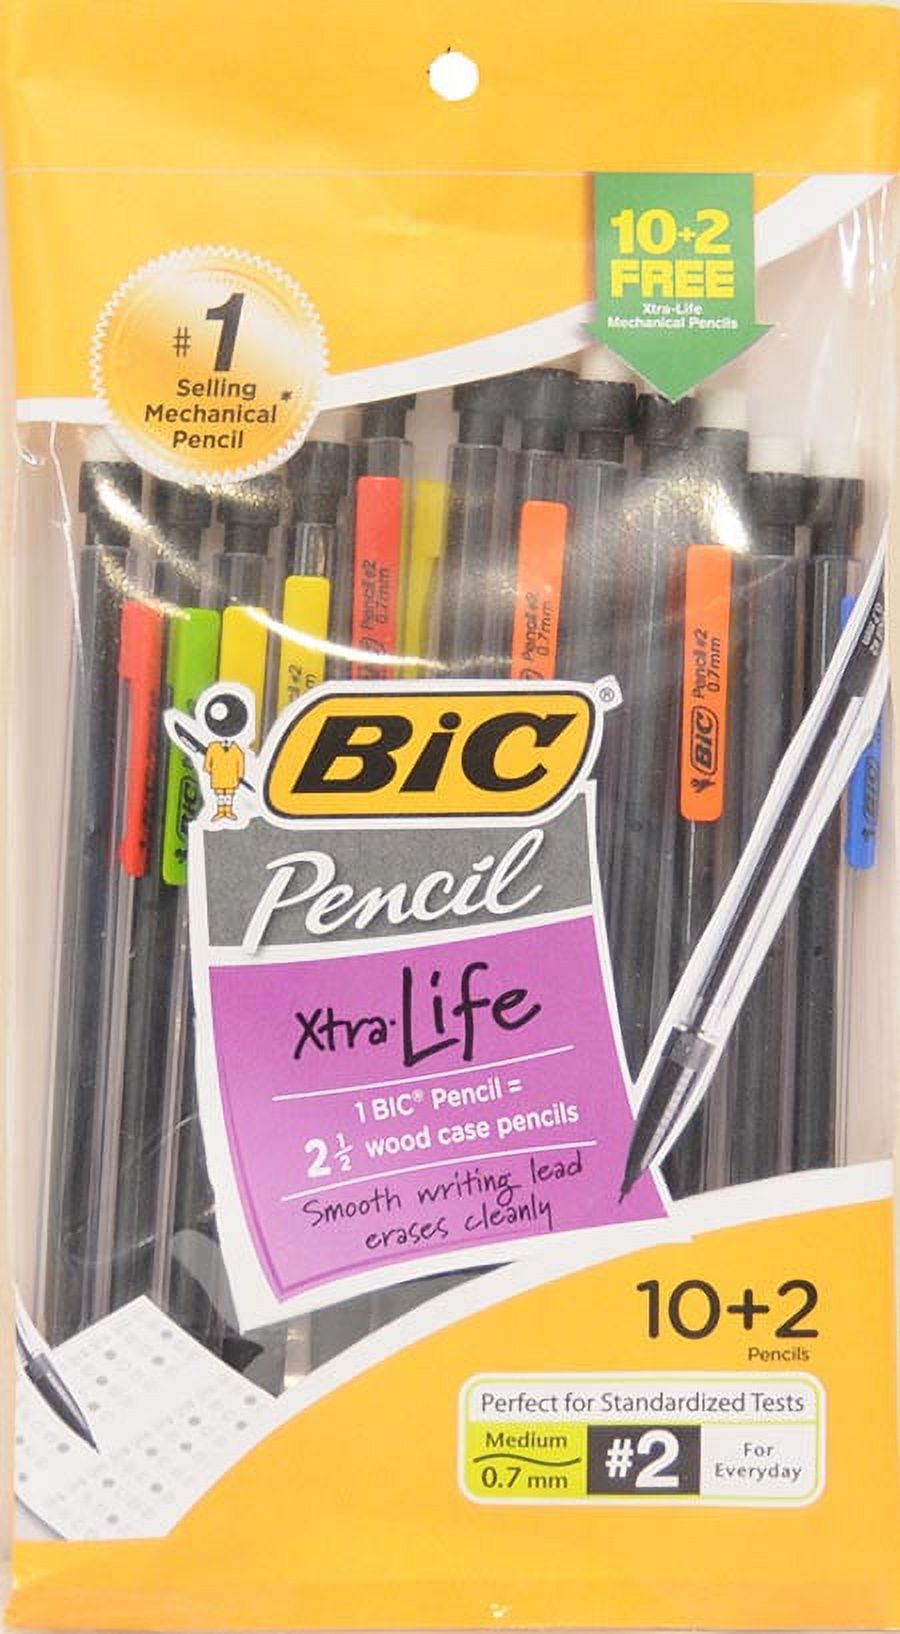 BIC Mechanical Pencil Extra Life, Black, Medium Point (0.7mm), 10+2 Pack - image 2 of 2